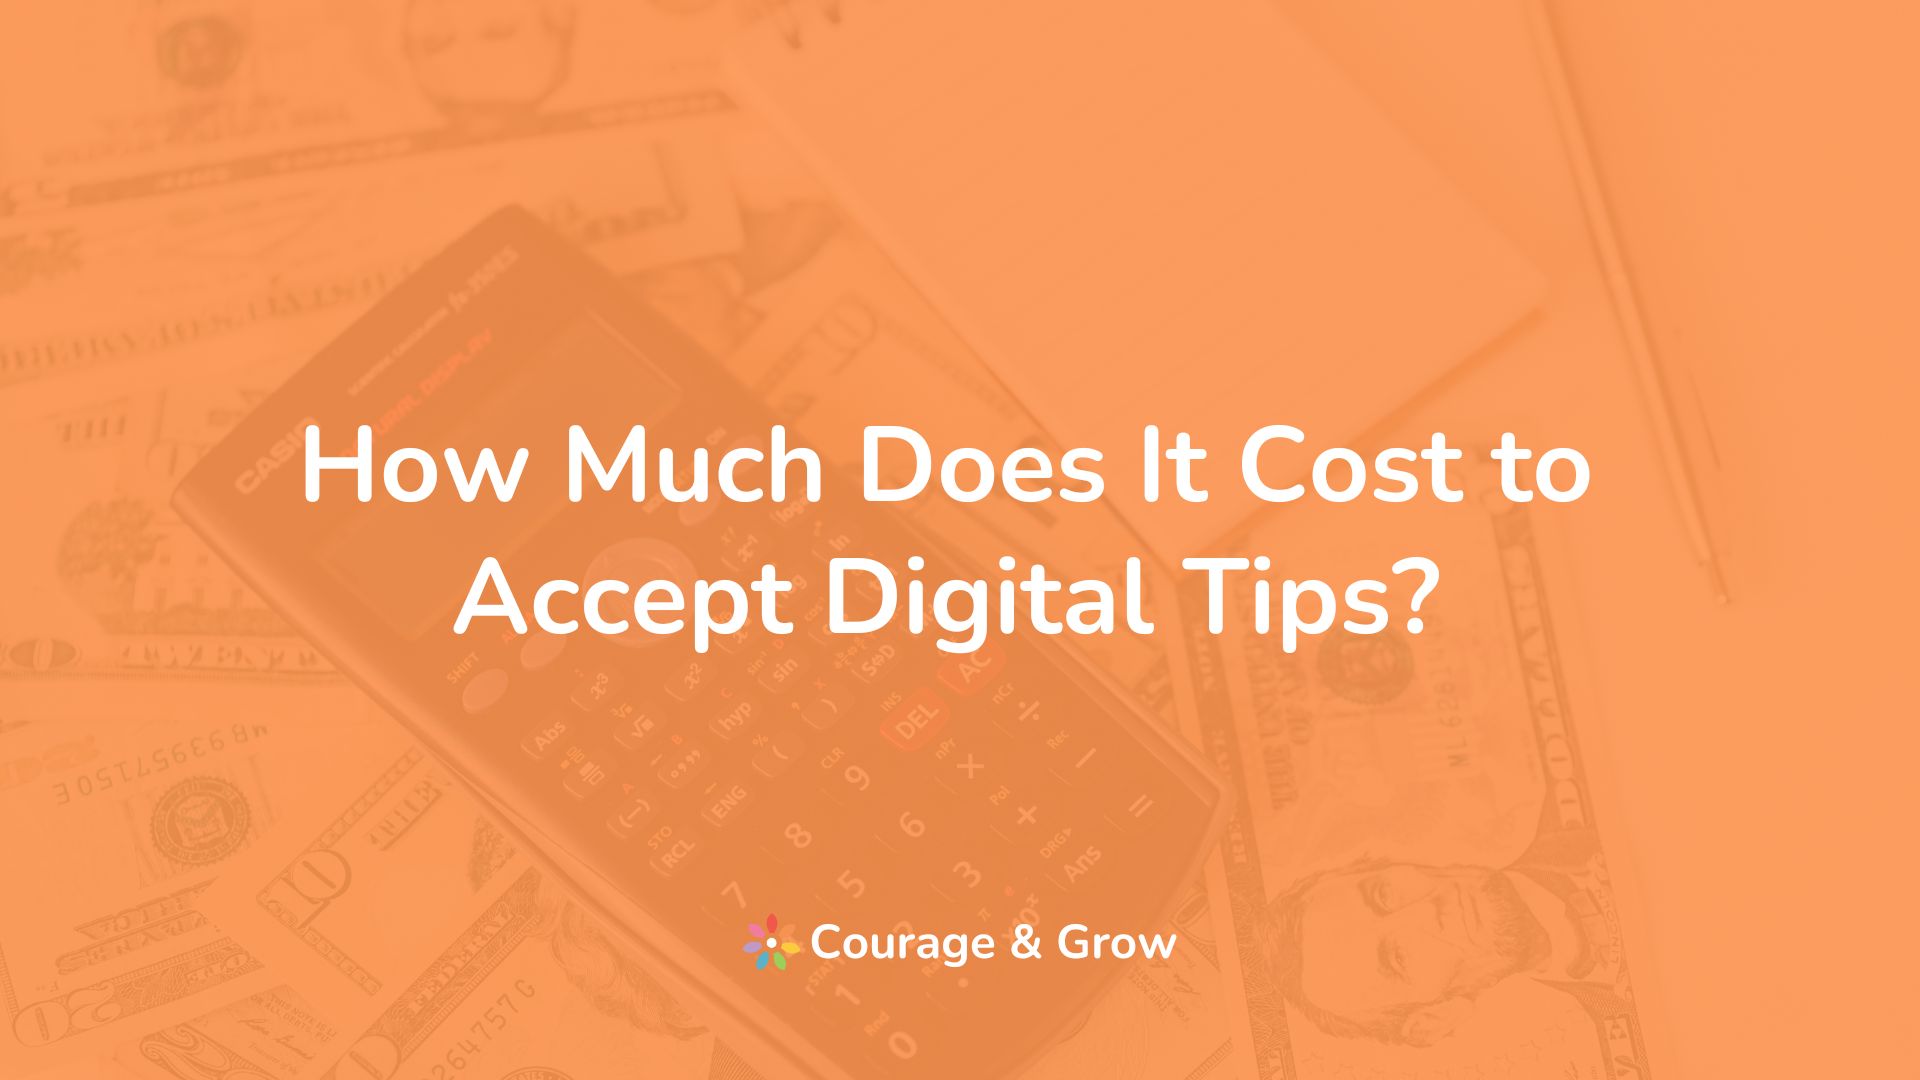 Digital Tipping Cost